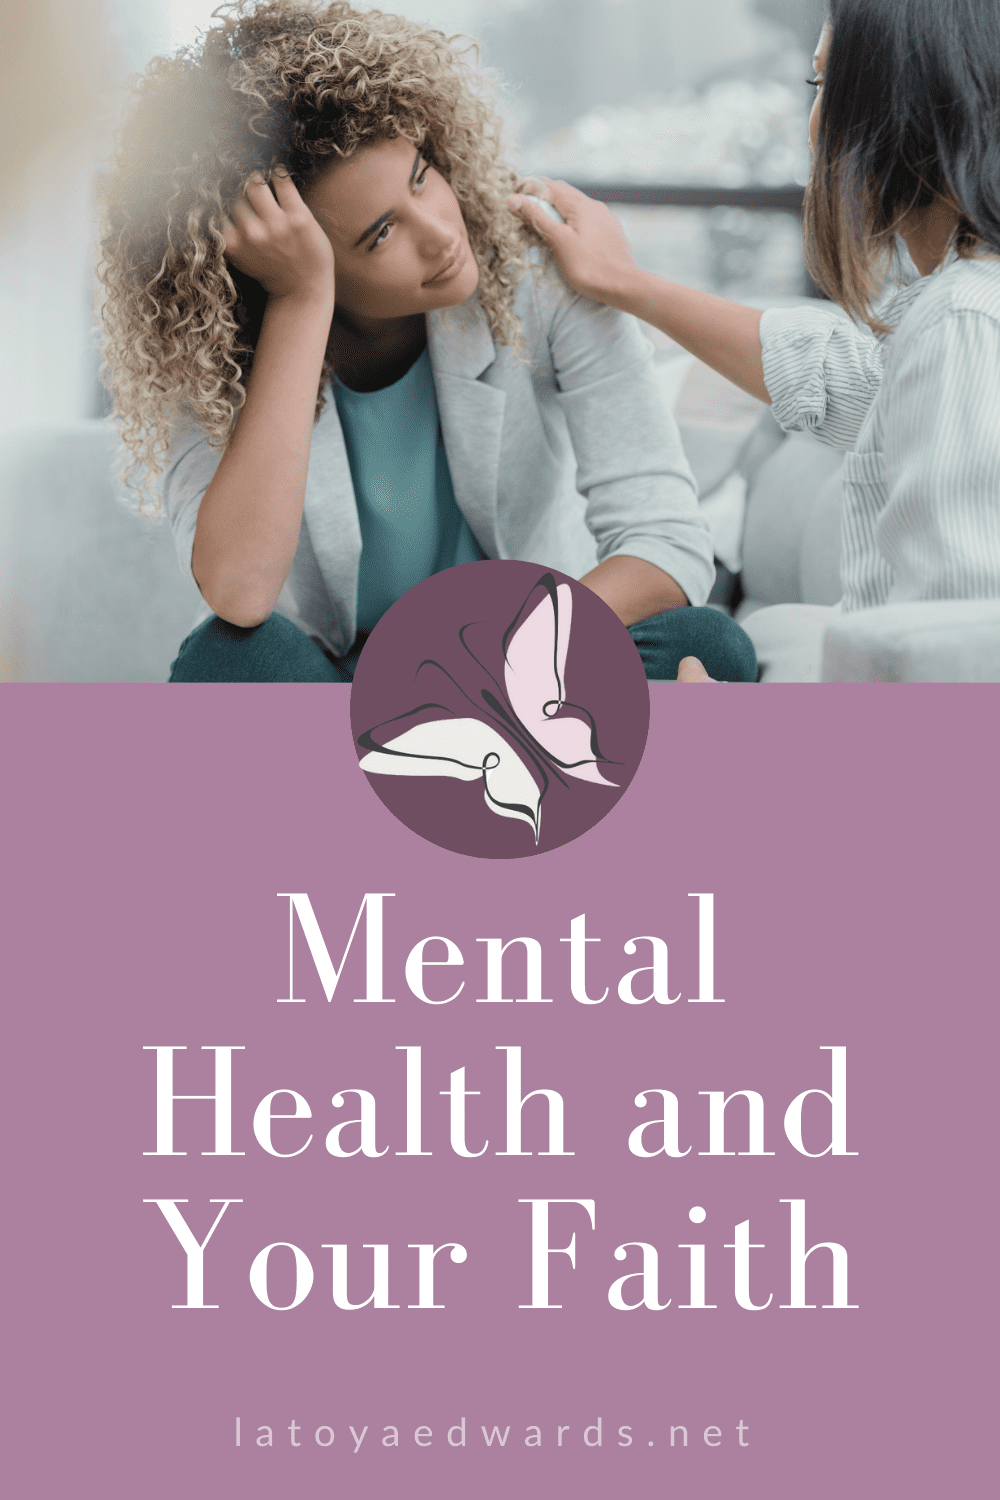 It's important to understand that your mental health struggles are not due to a lack of faith. Learn 6 things have been helpful for me in taking care of myself as I walk through hard things and work towards improving my mental health.